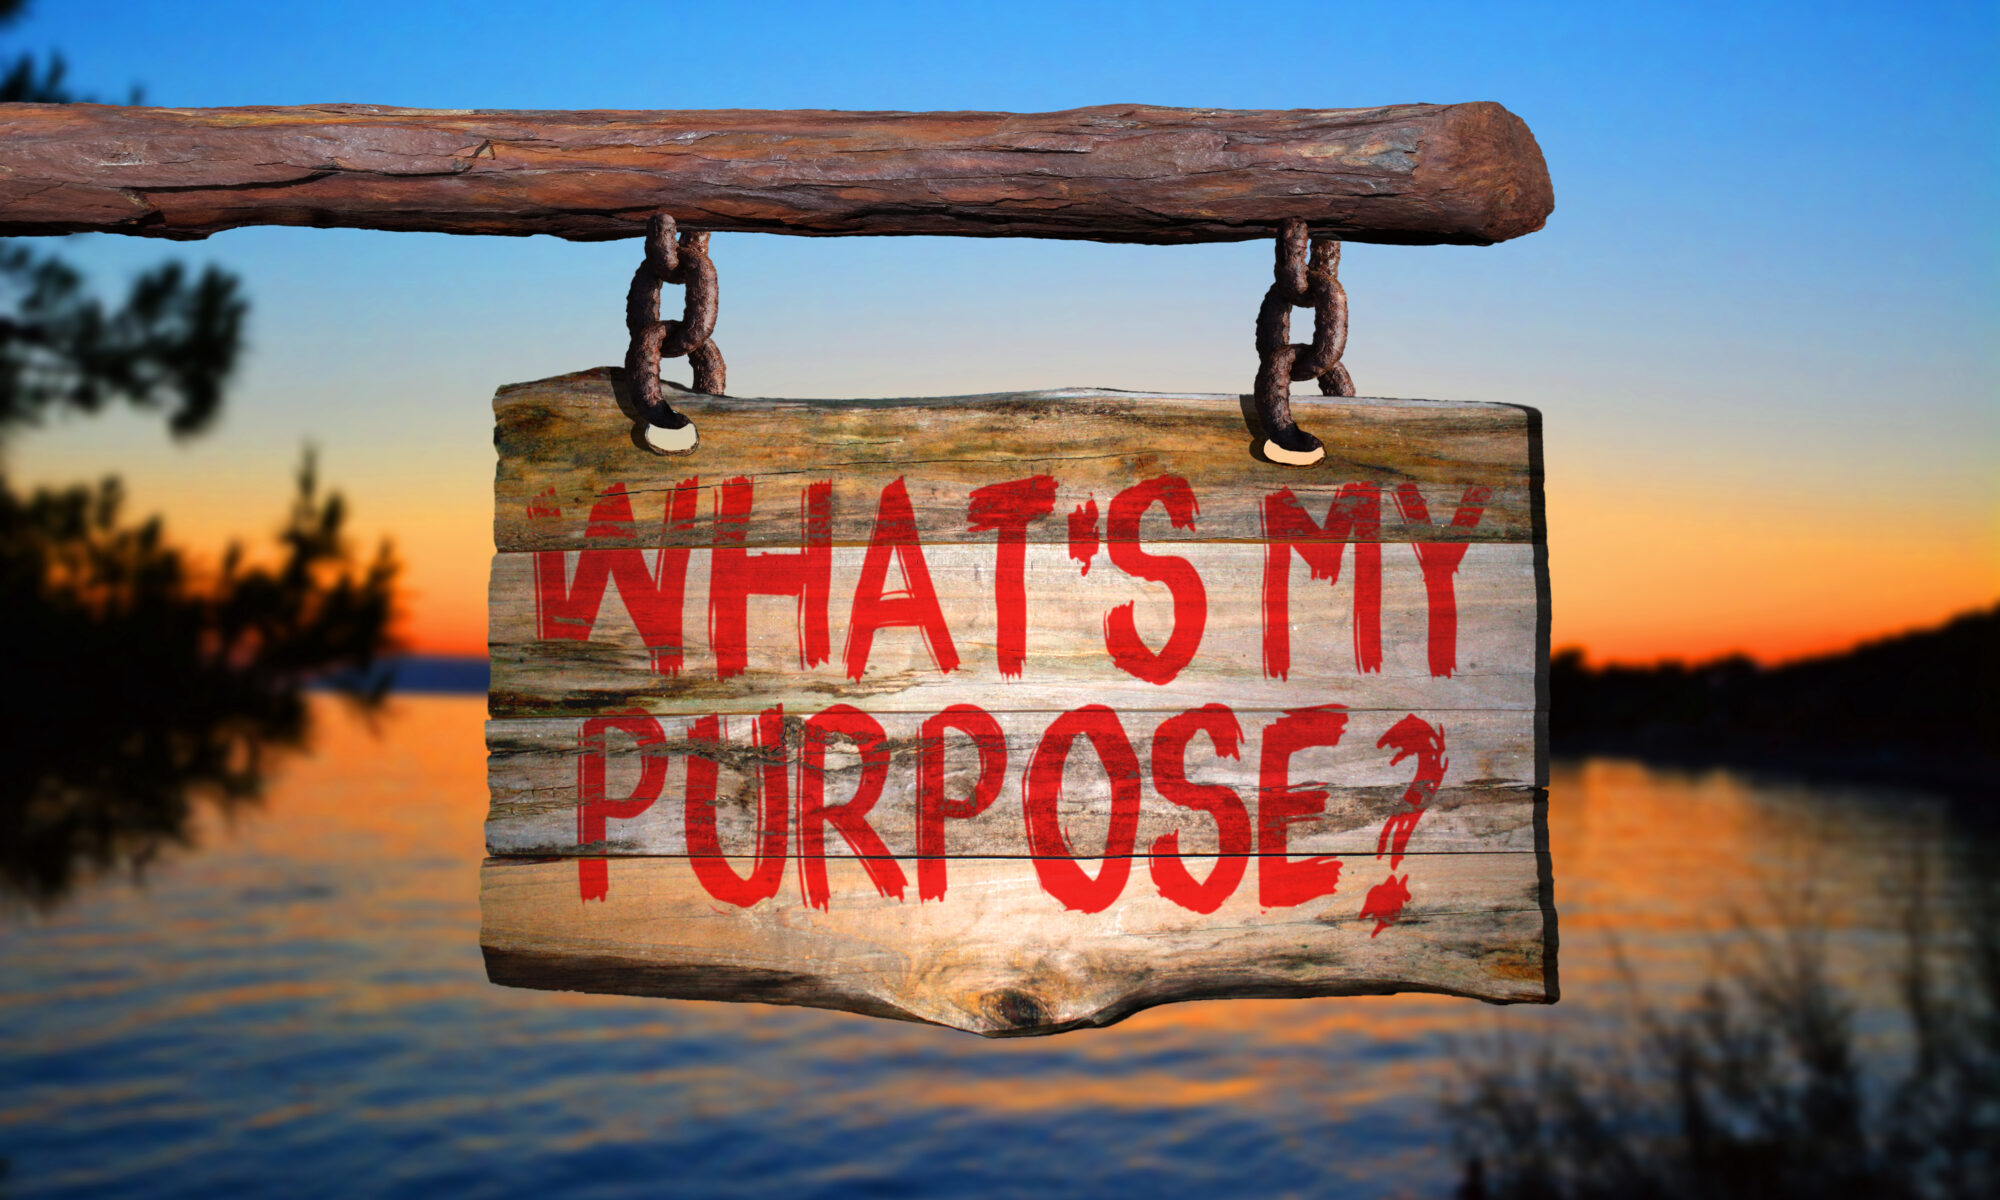 How do we escape fear to find purpose and a joyful life